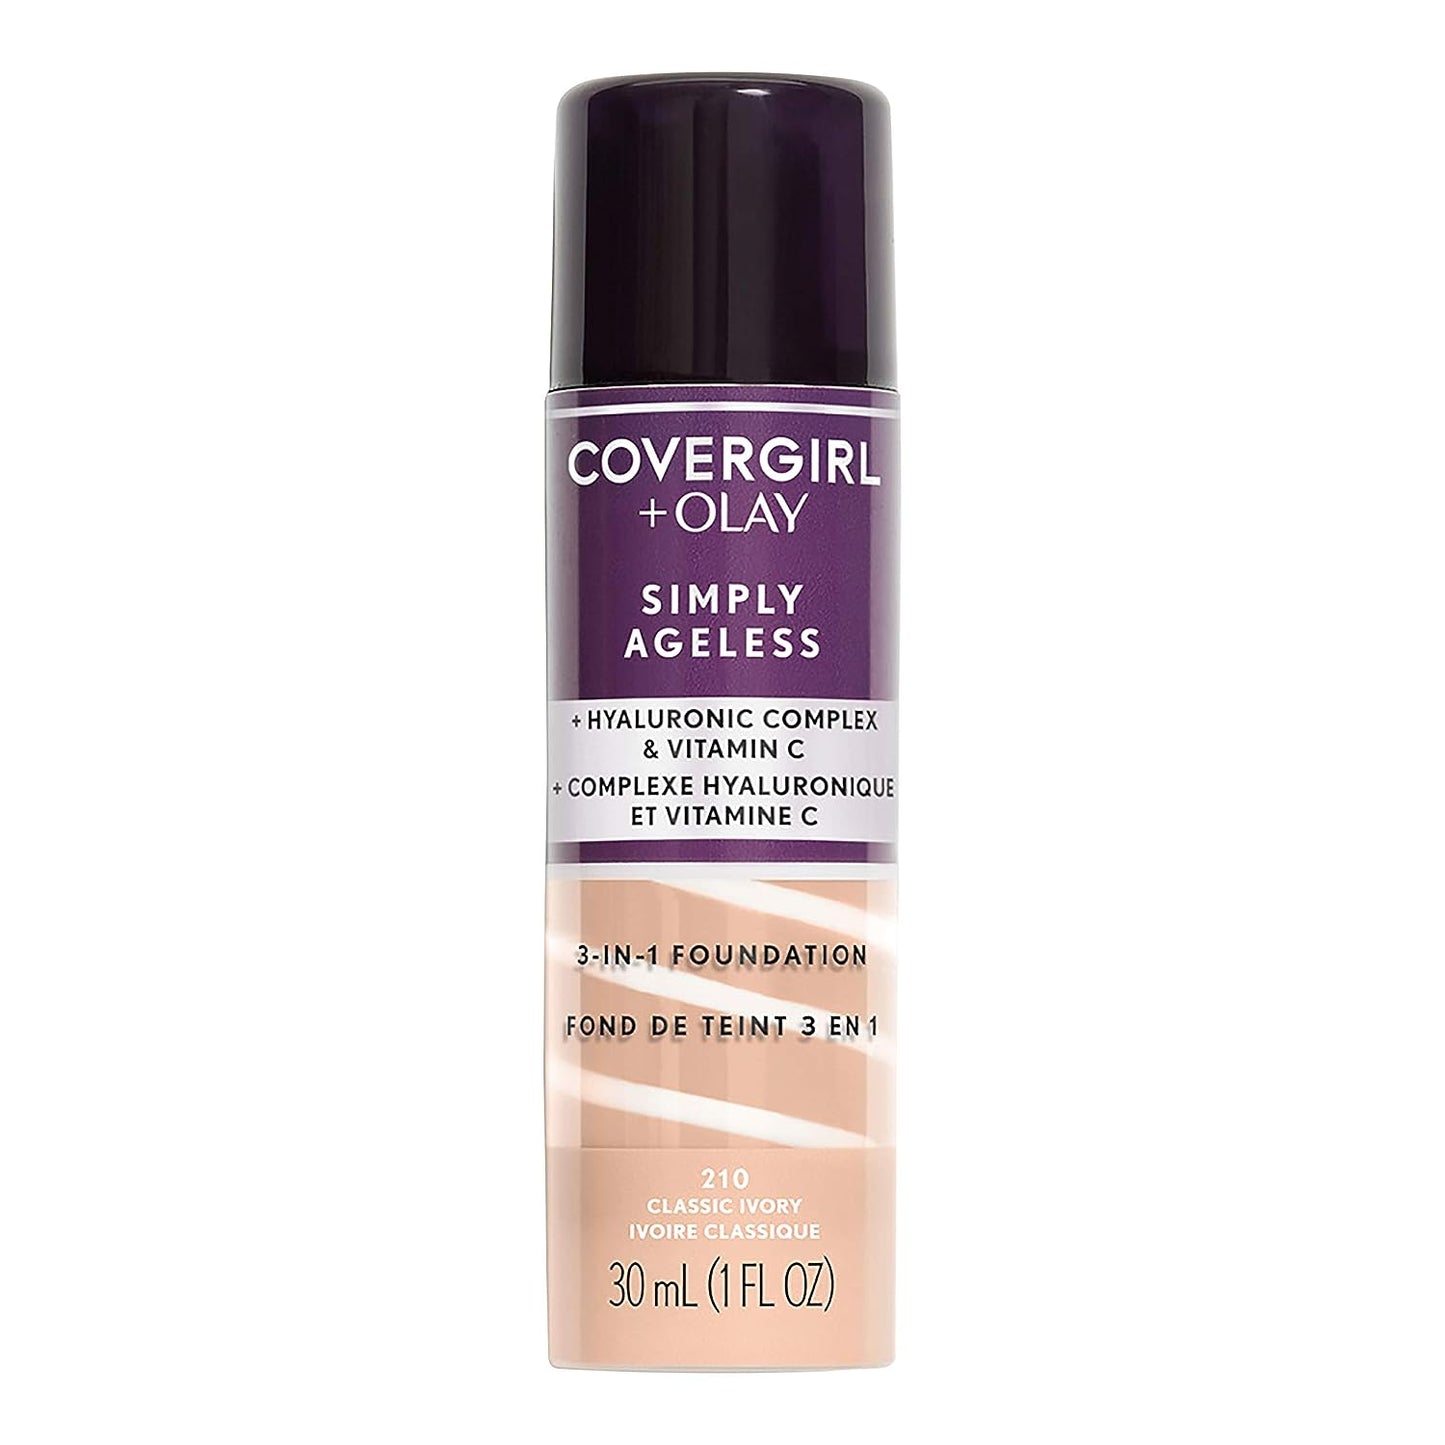 COVERGIRL+OLAY-Simply-Ageless-3-in-1-Liquid-Foundation,-Classic-4002